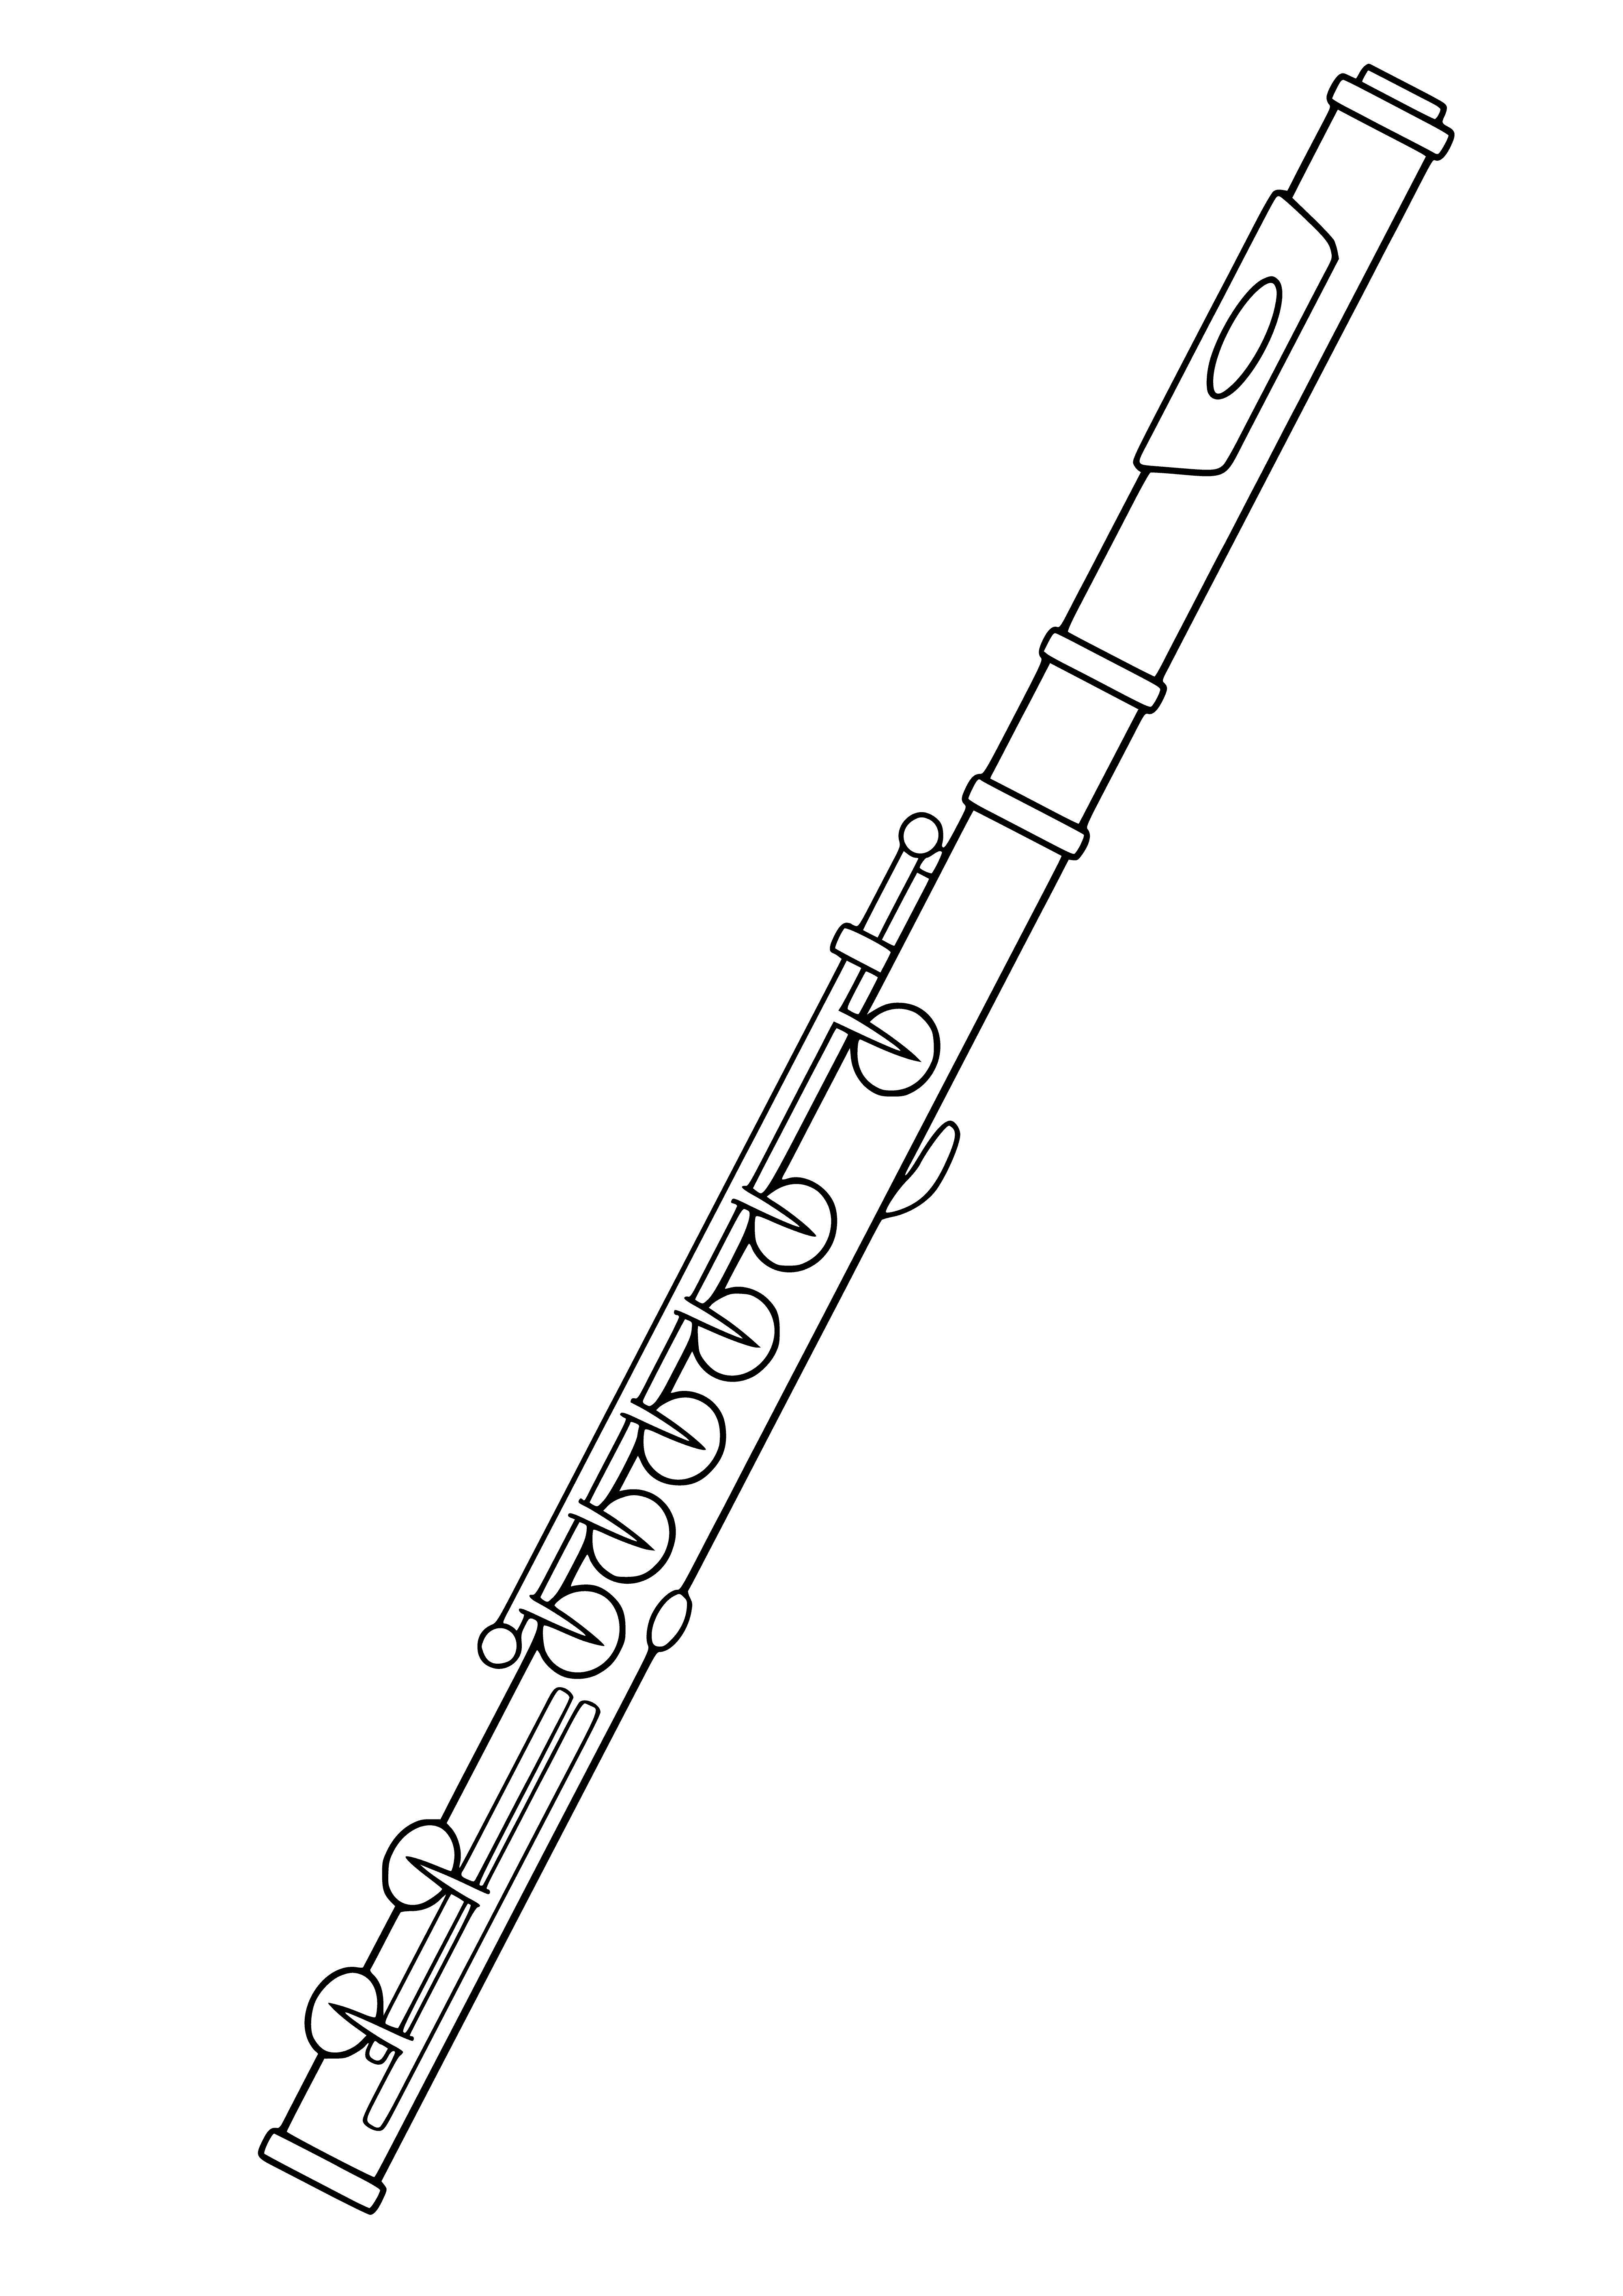 coloring page: Flute is a metal musical instrument with hole in middle. It is blown with mouth to make a sound and often used in orchestras. #musicalinstrument #orchestra